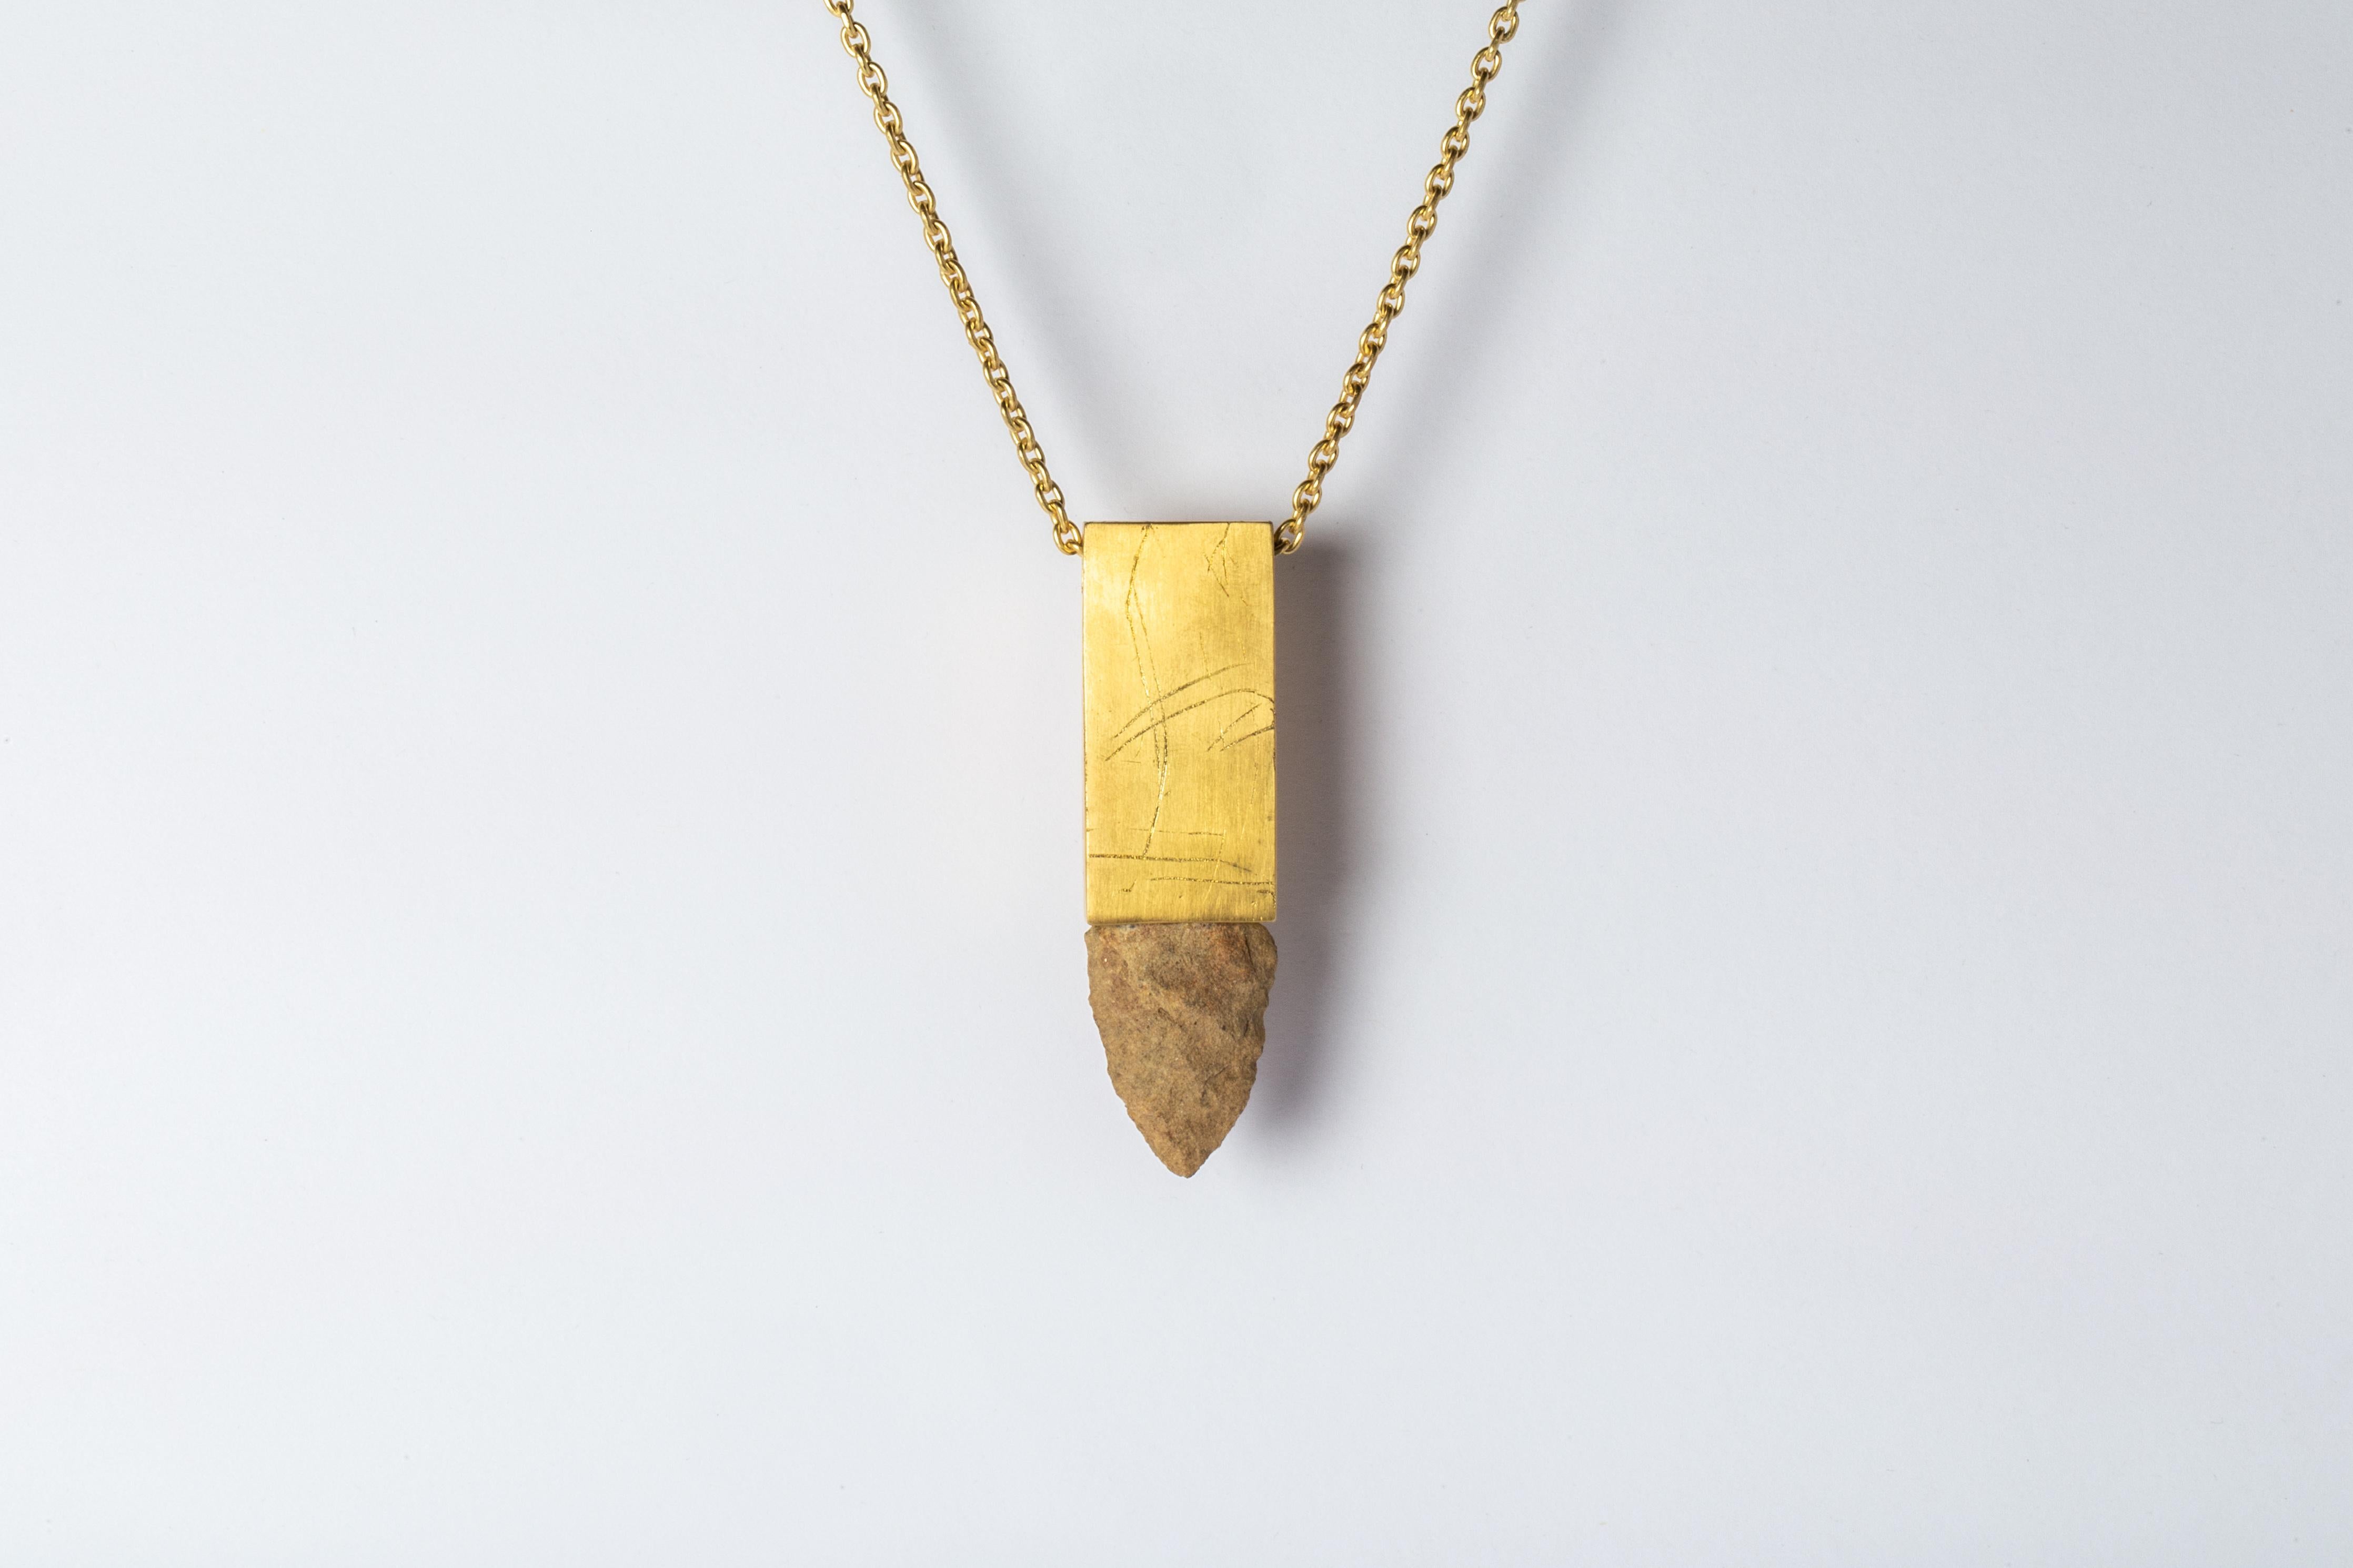 Pendant necklace in the shape of cuboid made in brass, sterling silver and an arrowhead relic. Brass and sterling silver are electroplated with 18k gold and then dipped into acid to create subtly destroyed surface.
There are currently two design